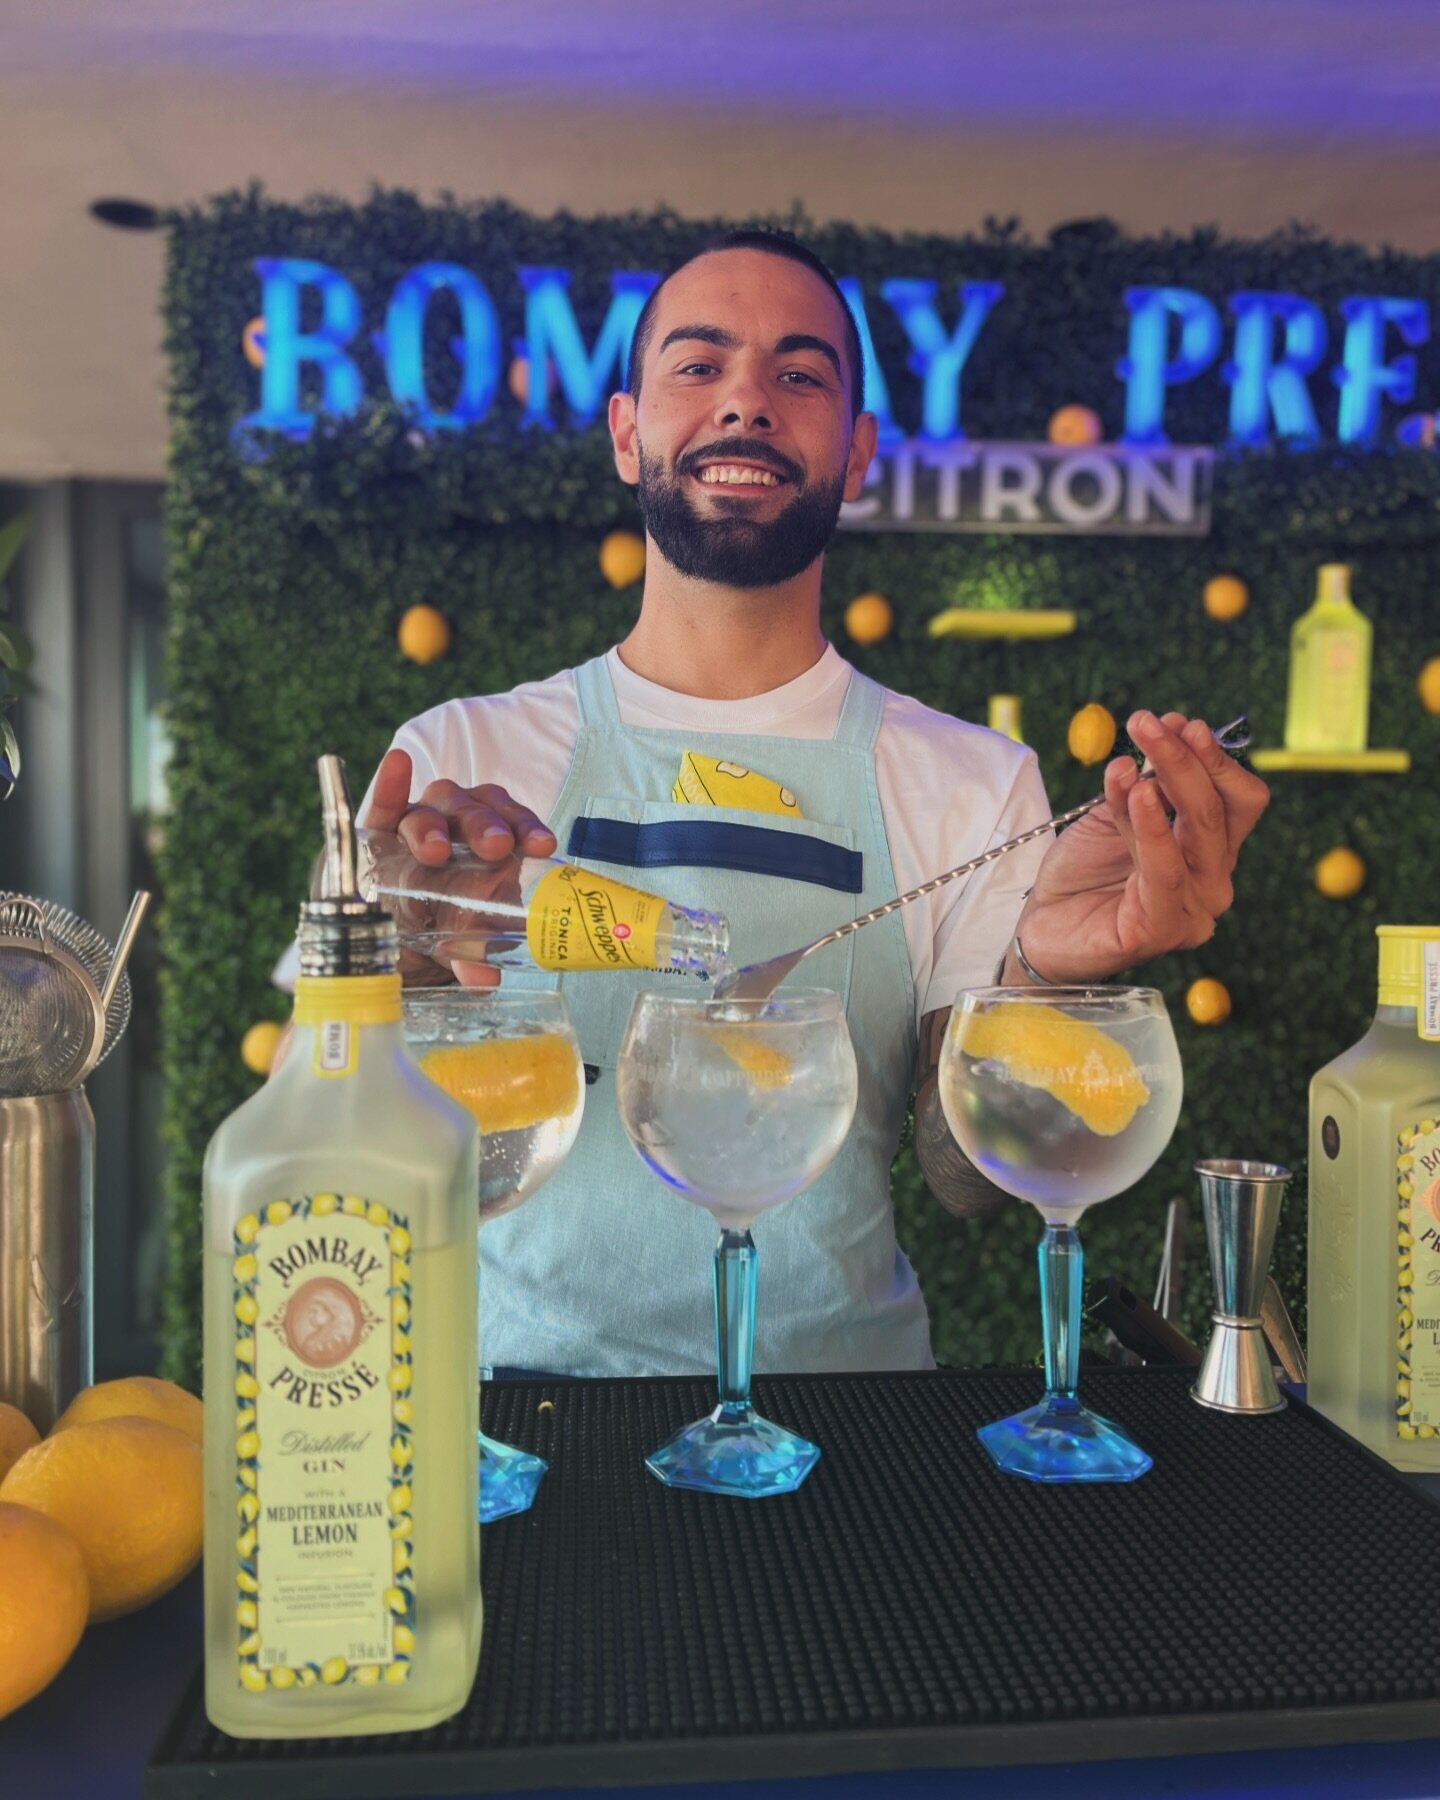 Even on a Tuesday after April Fools&rsquo;, we&rsquo;re not kidding about our love for lemons! Embracing the tangy vibes with Bombay&rsquo;s presse citron. 🍋🍸
.
.
.
.